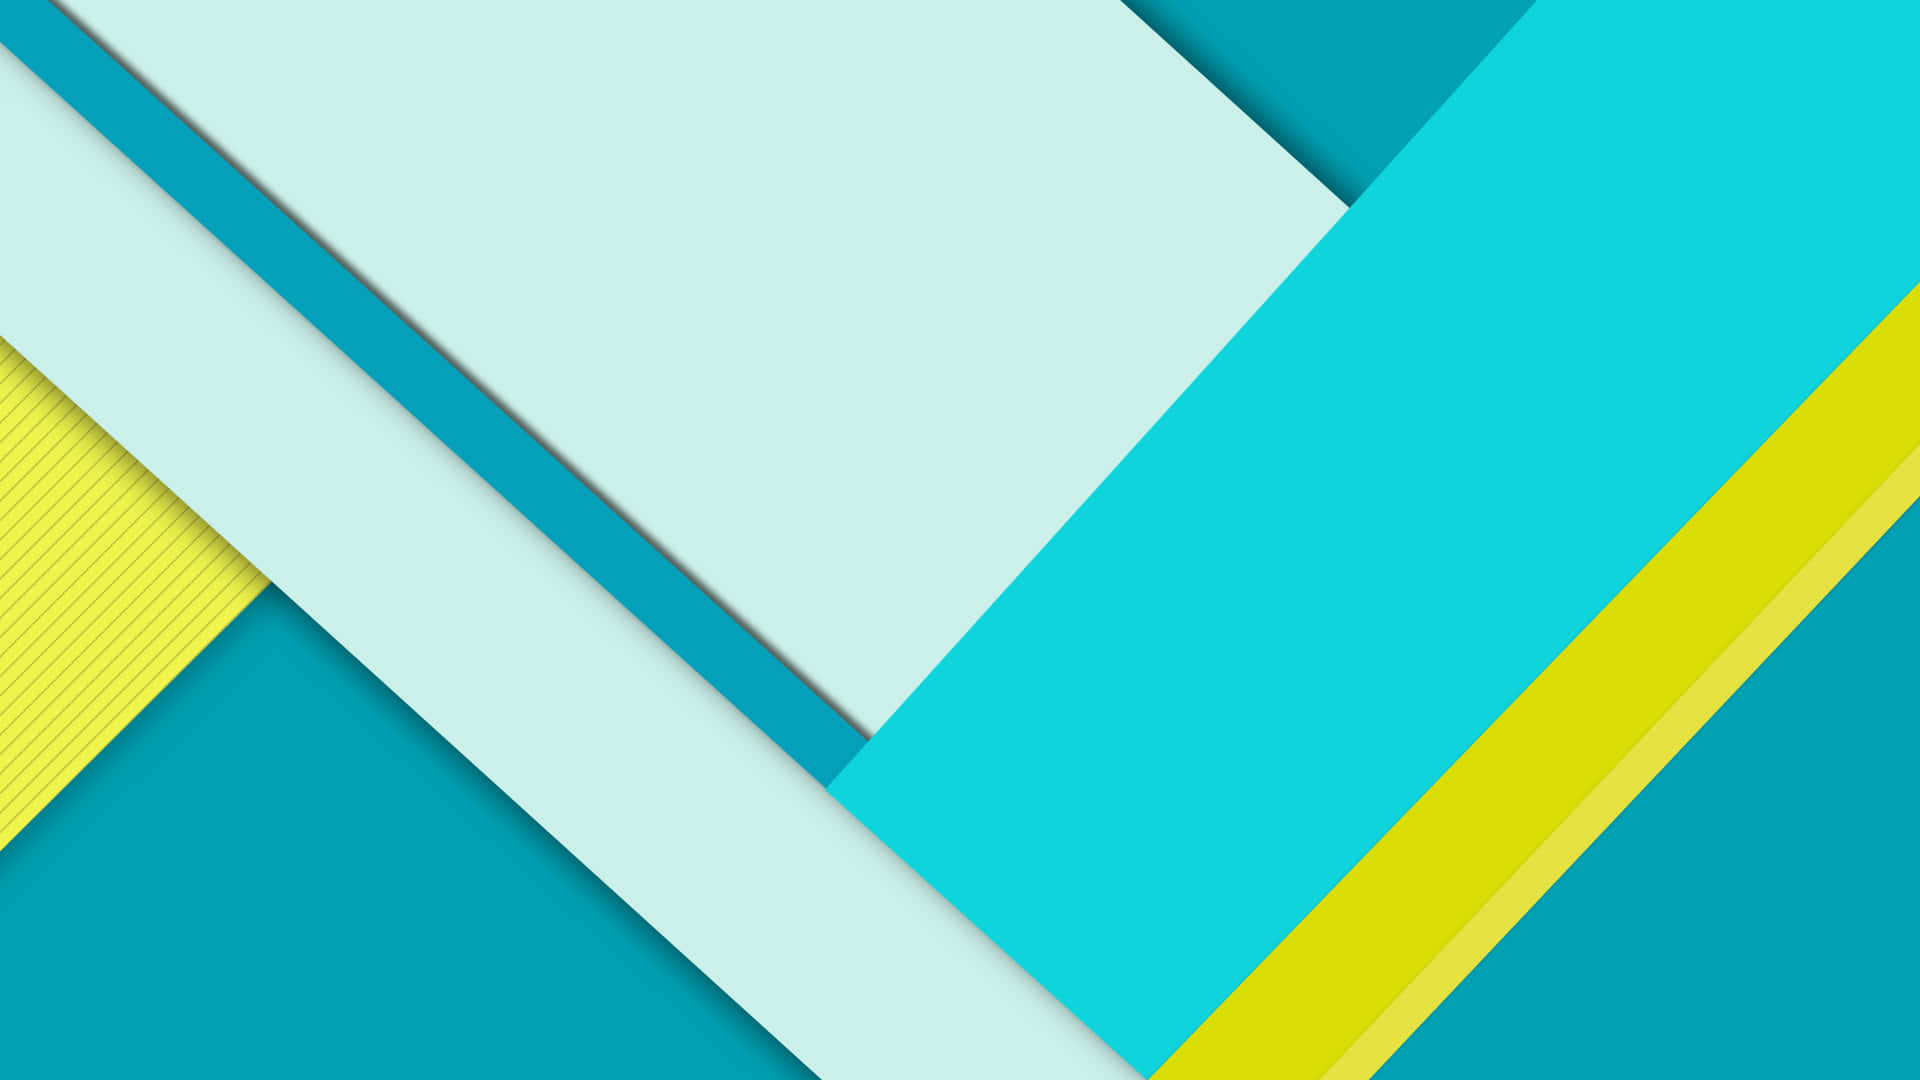 Enjoy the beauty of Material Design with this high-resolution wallpaper